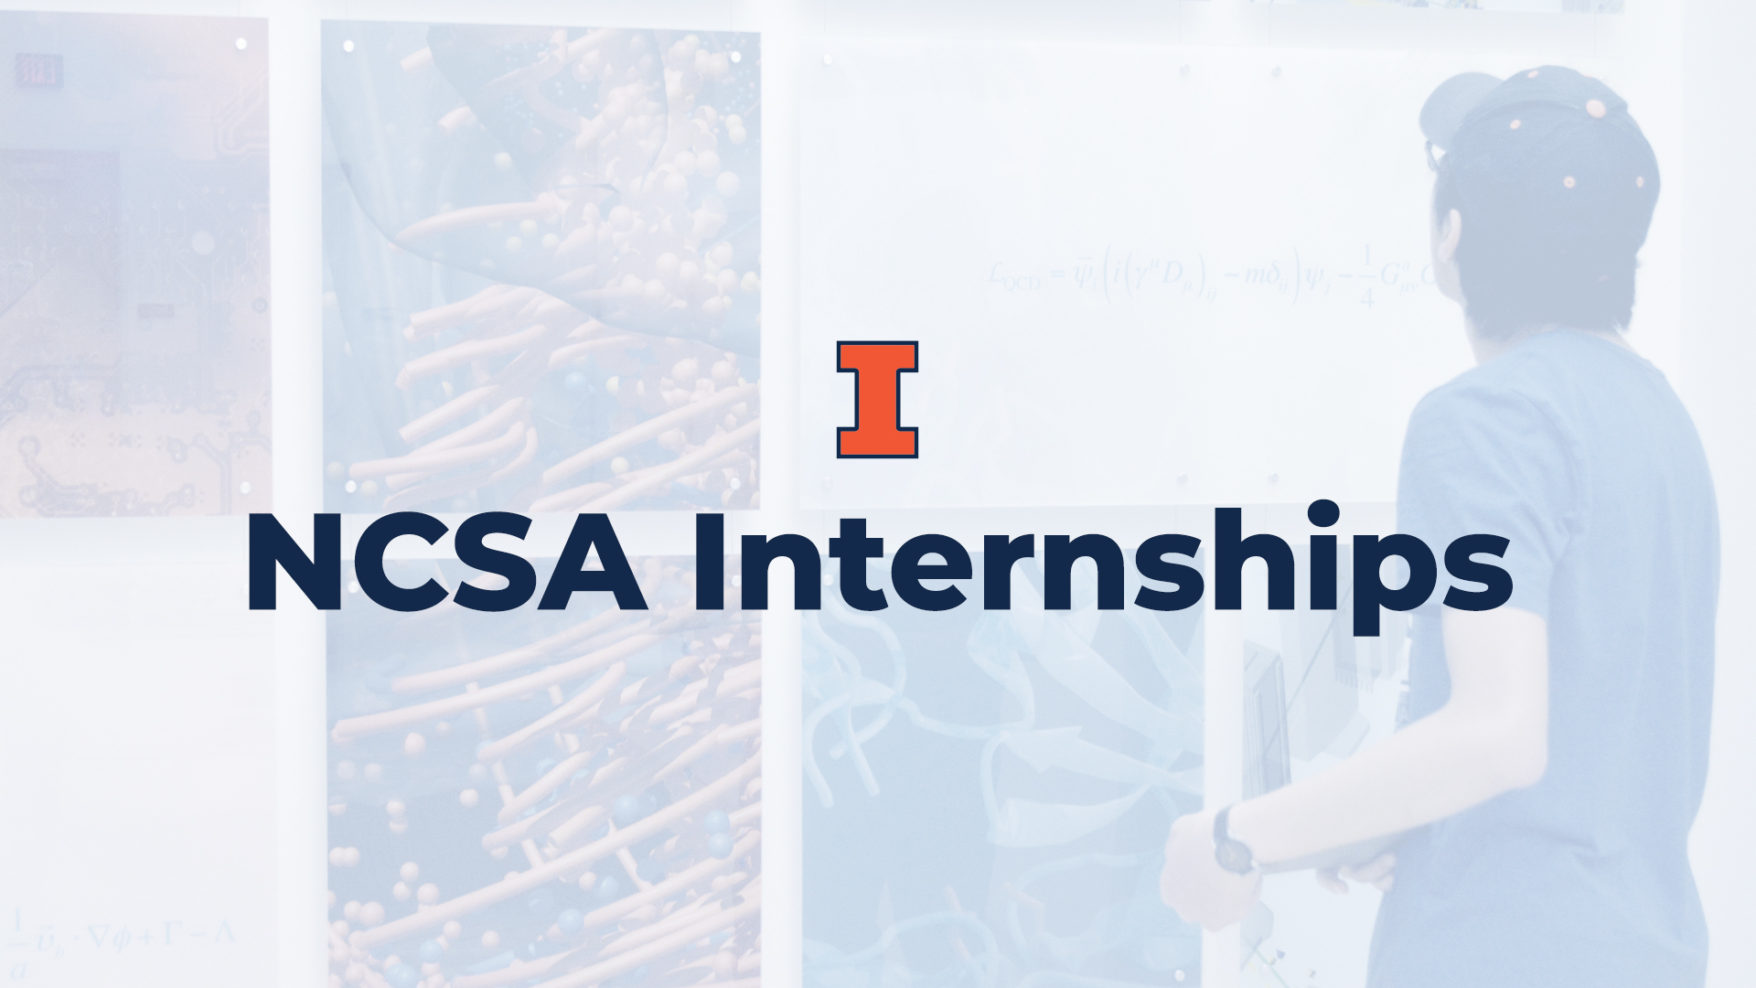 Greyed out image of student, with the text 'NCSA Internships' and the Illinois block I logo